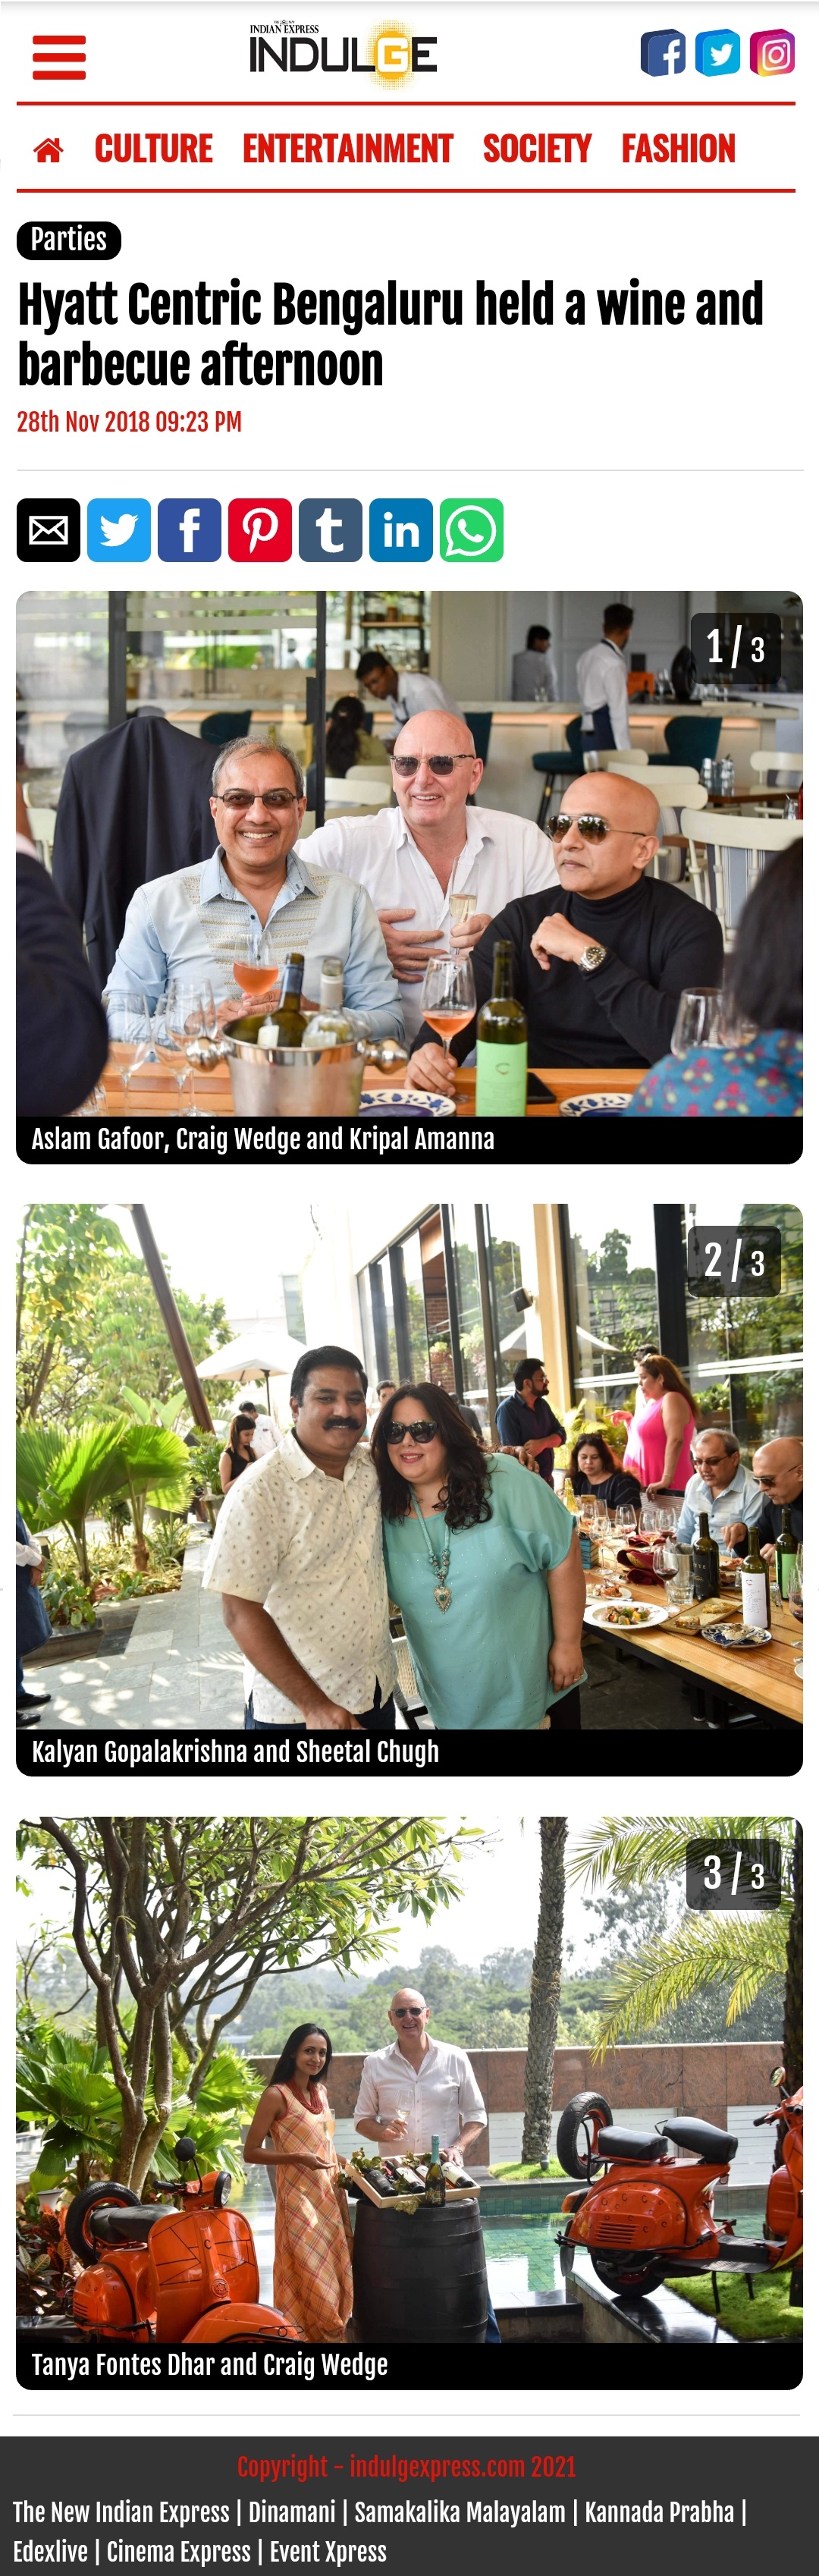 Wine And Barbecue Afternoon At Hyatt Centric Bengaluru